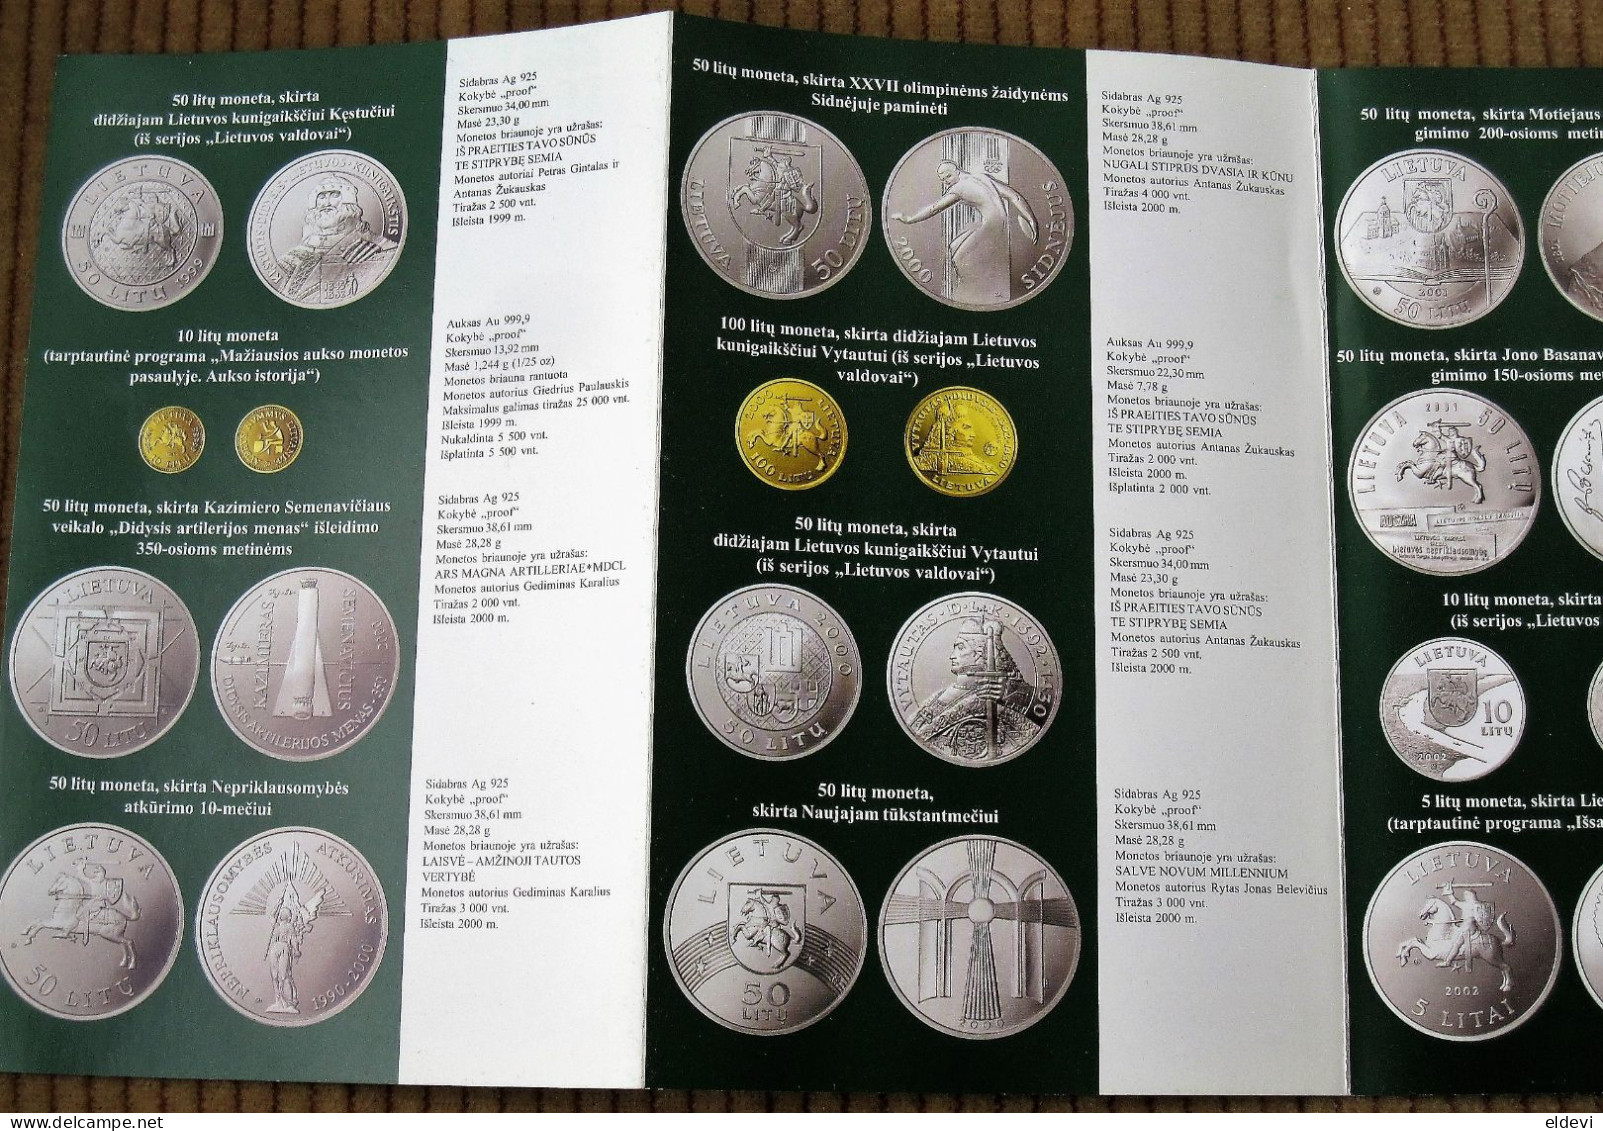 Lithuania Bank Booklet - Lithuanian Collectors Coins 1993 - 2000's / #4 - Lituania